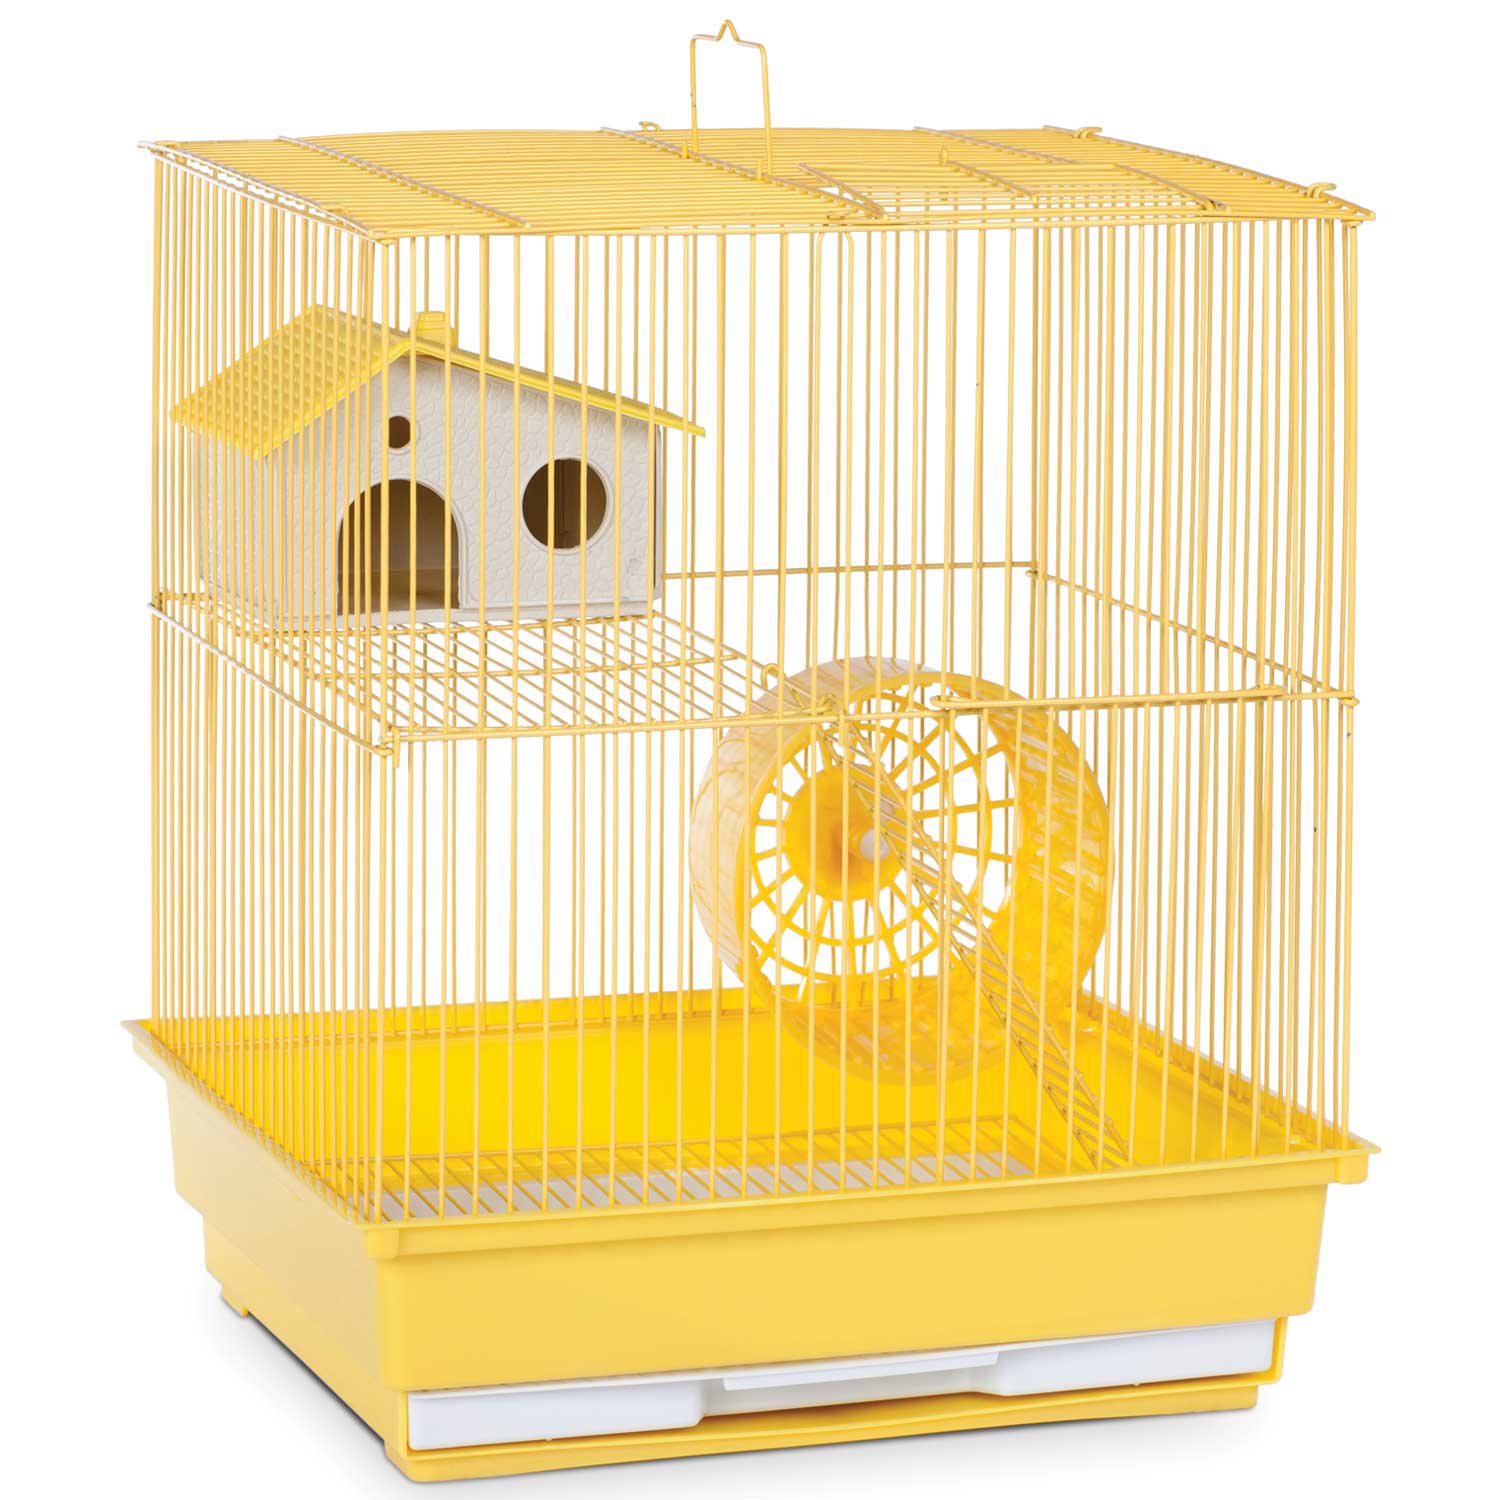 Prevue Hendryx Two Story Small Animal Cage | Petco